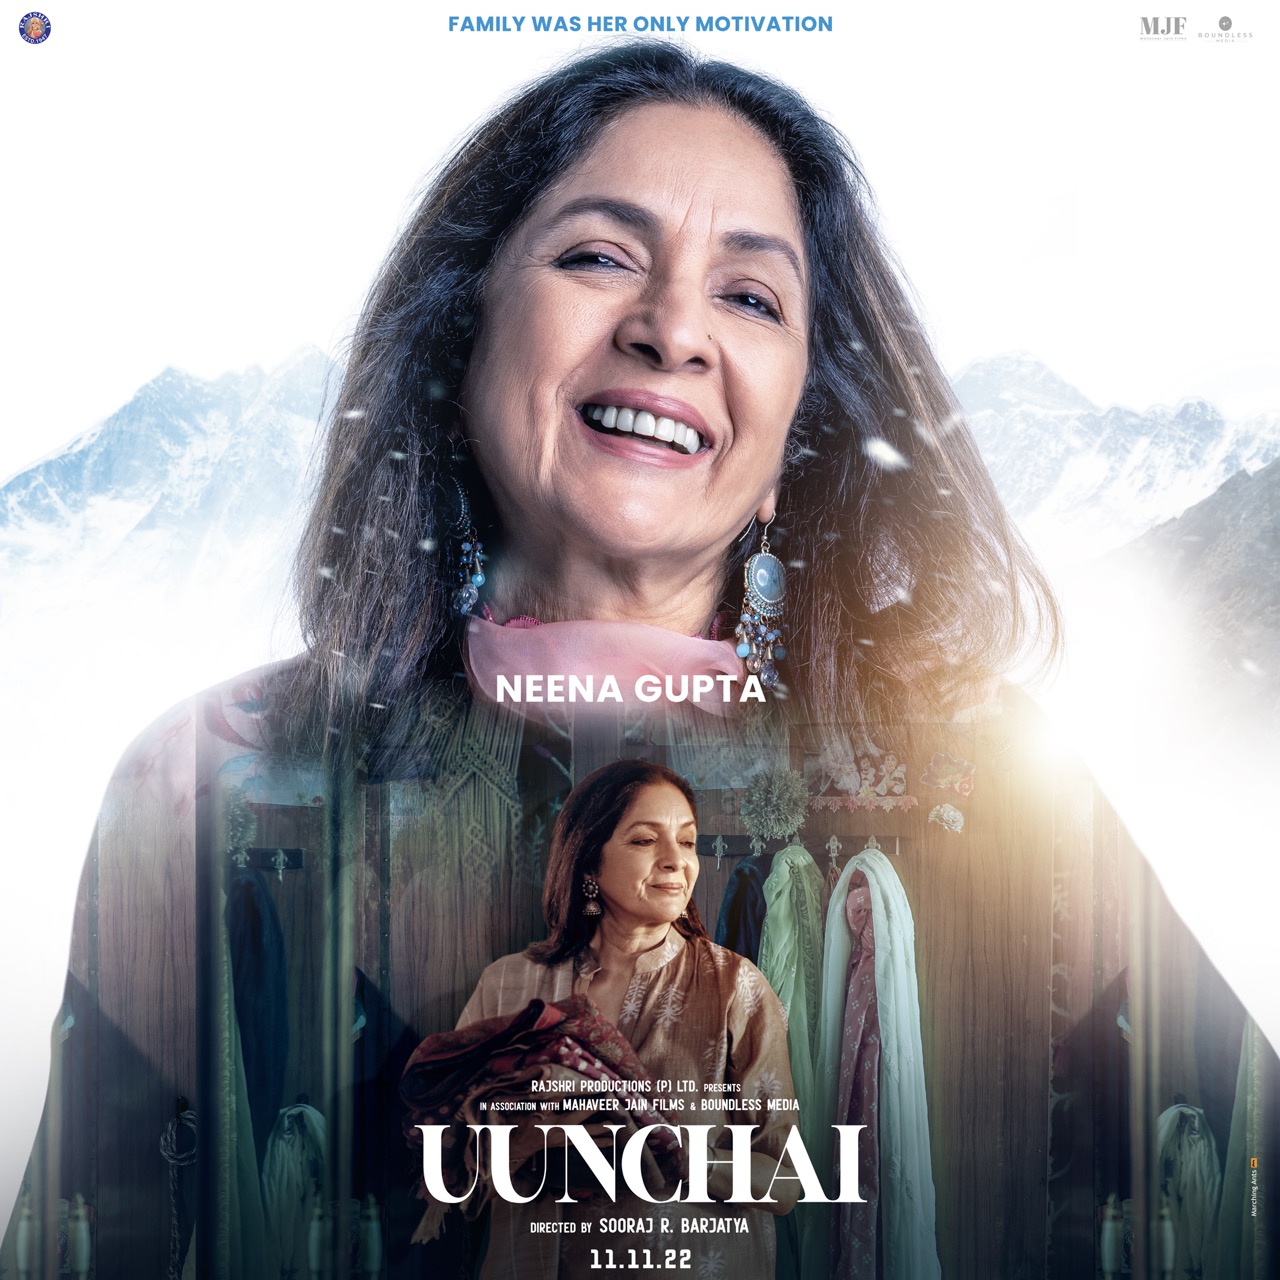 At the Uunchai of her career, here is Neena Gupta’s first look from the highly anticipated Rajshri Film – Uunchai!